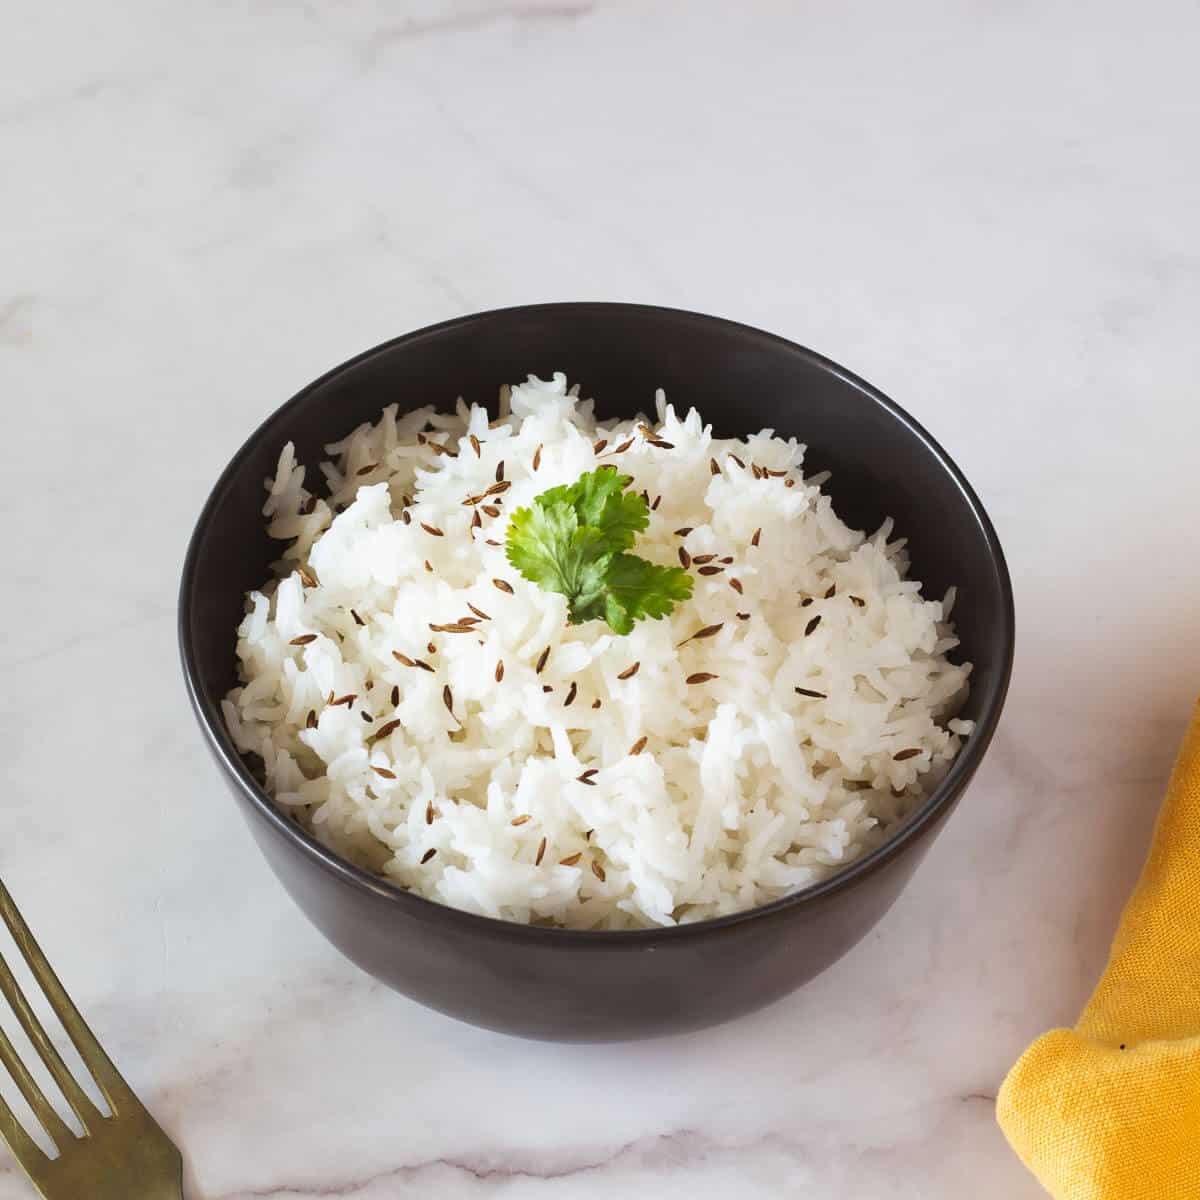 https://ourplantbasedworld.com/wp-content/uploads/2022/08/how-to-cook-basmati-rice-stove-9654-1.jpg